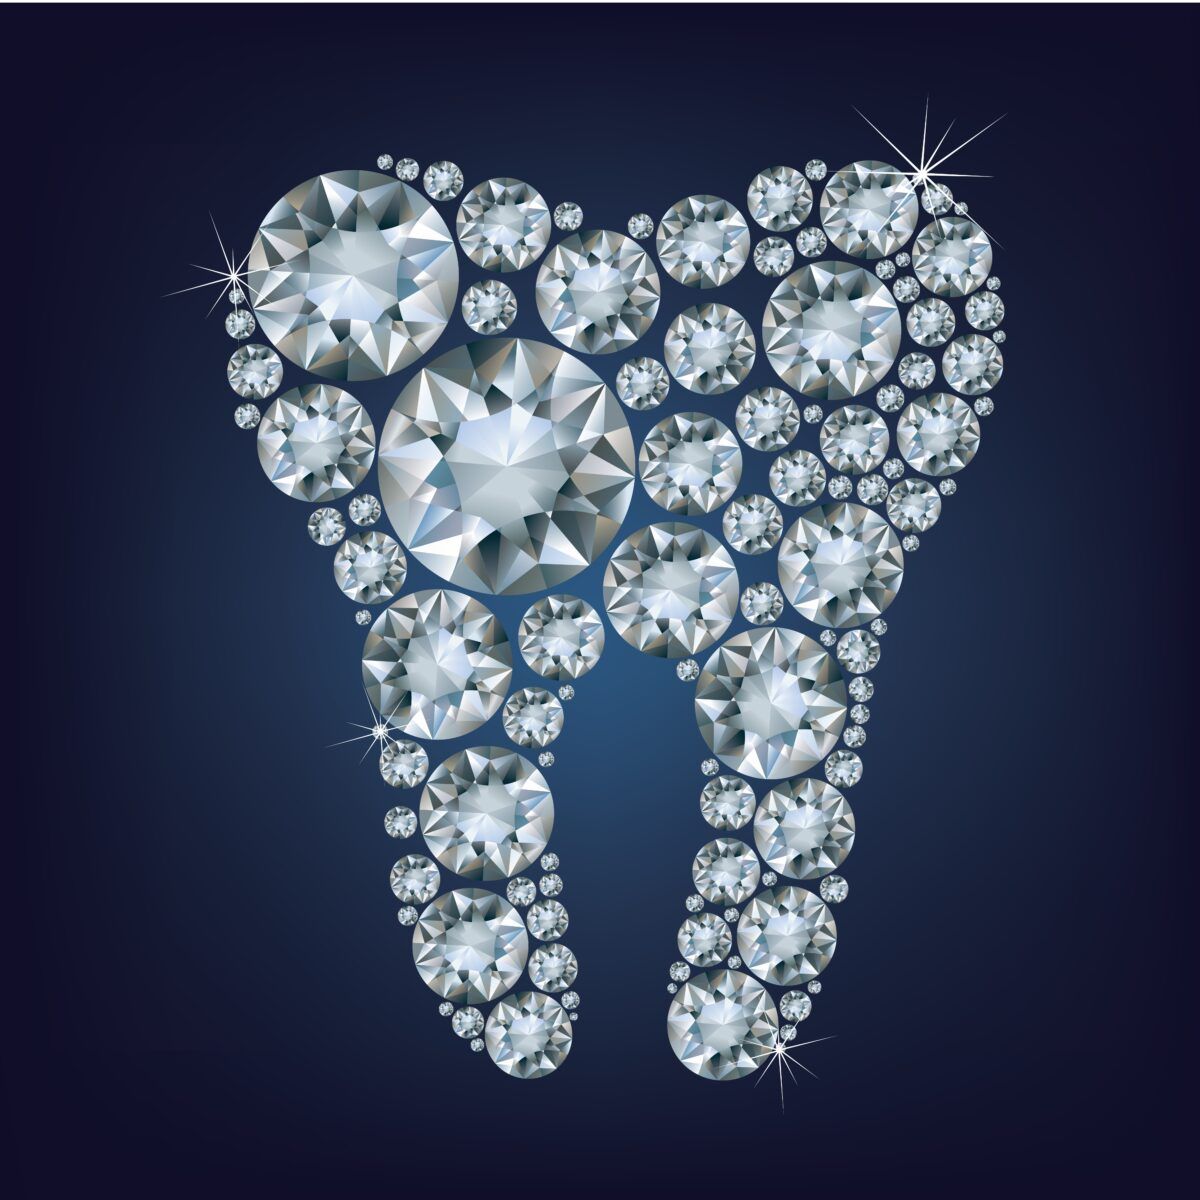 tooth shape made from diamonds